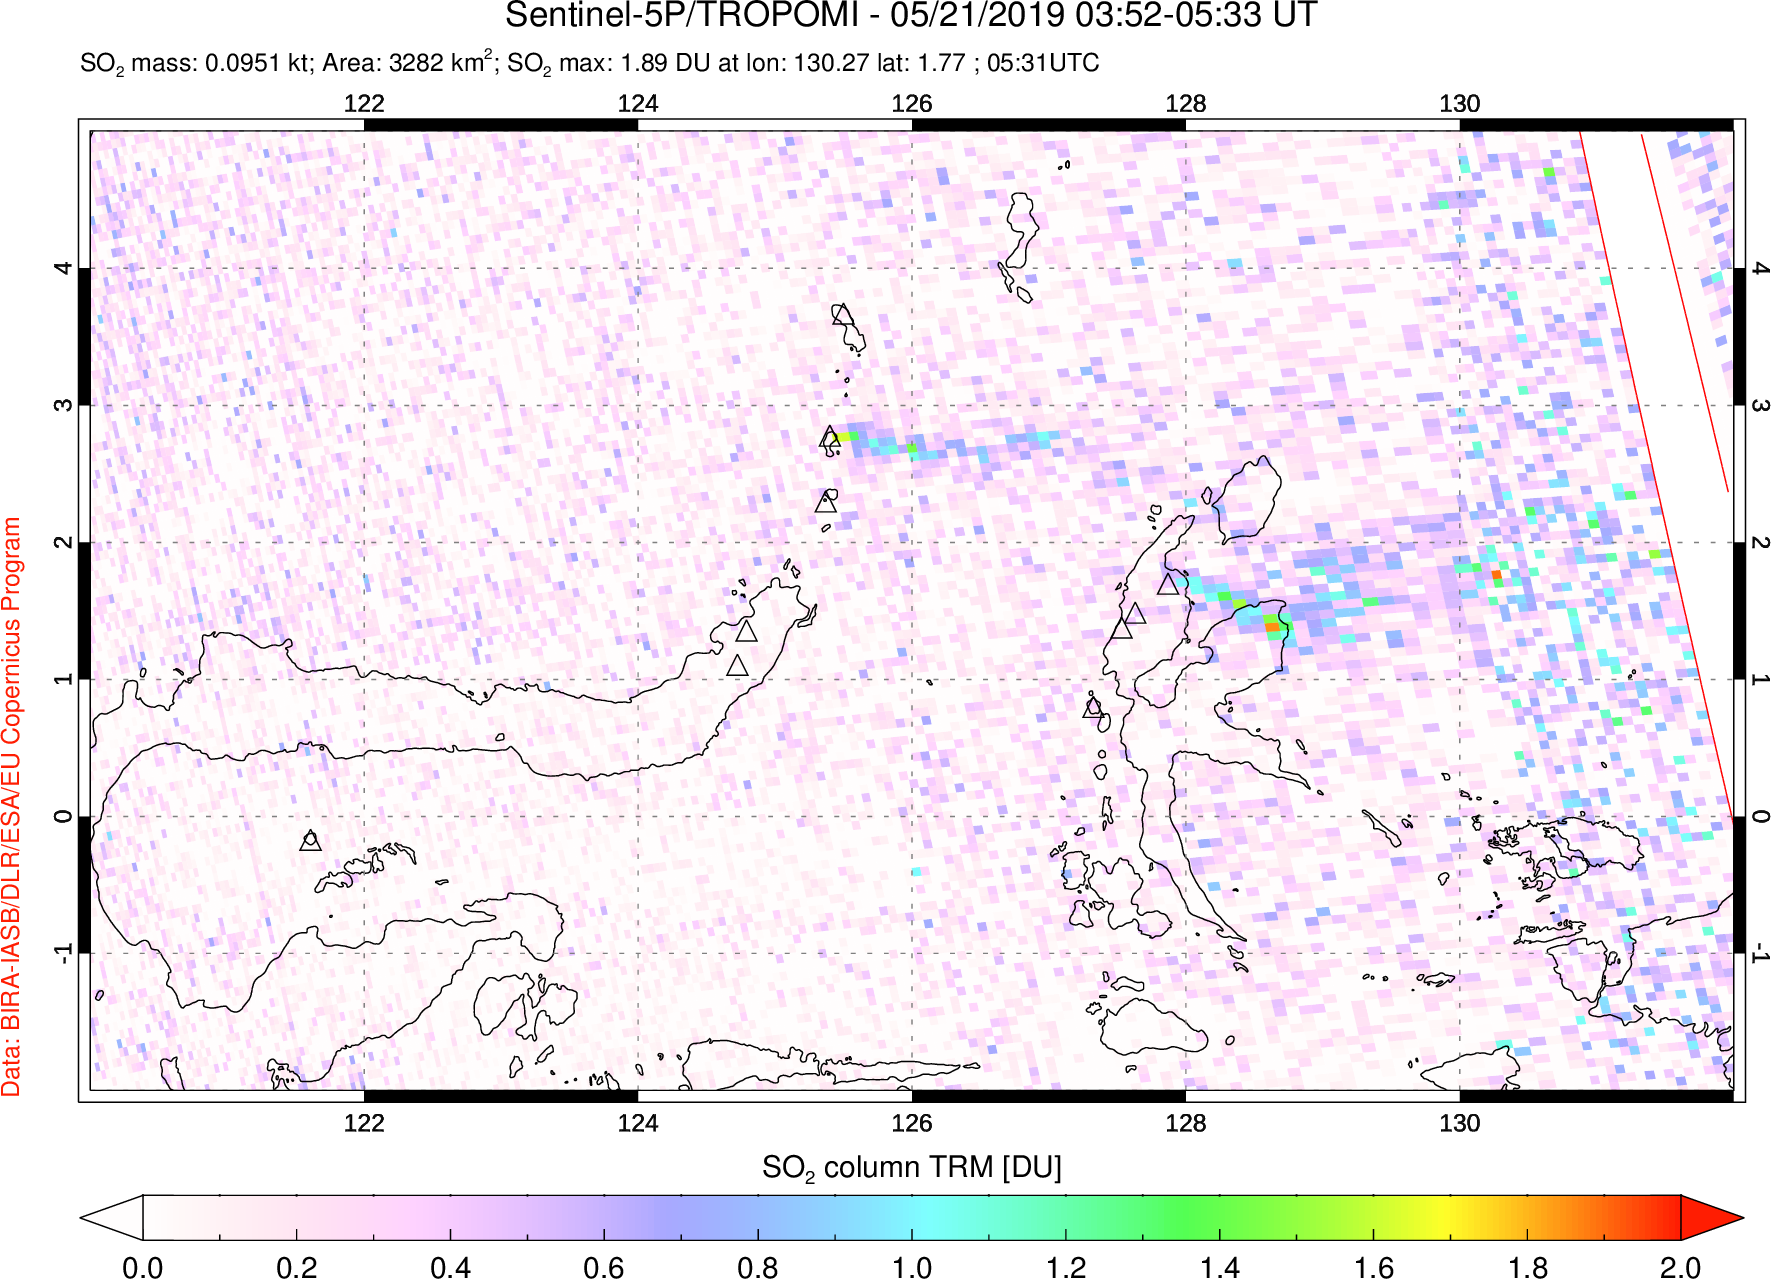 A sulfur dioxide image over Northern Sulawesi & Halmahera, Indonesia on May 21, 2019.